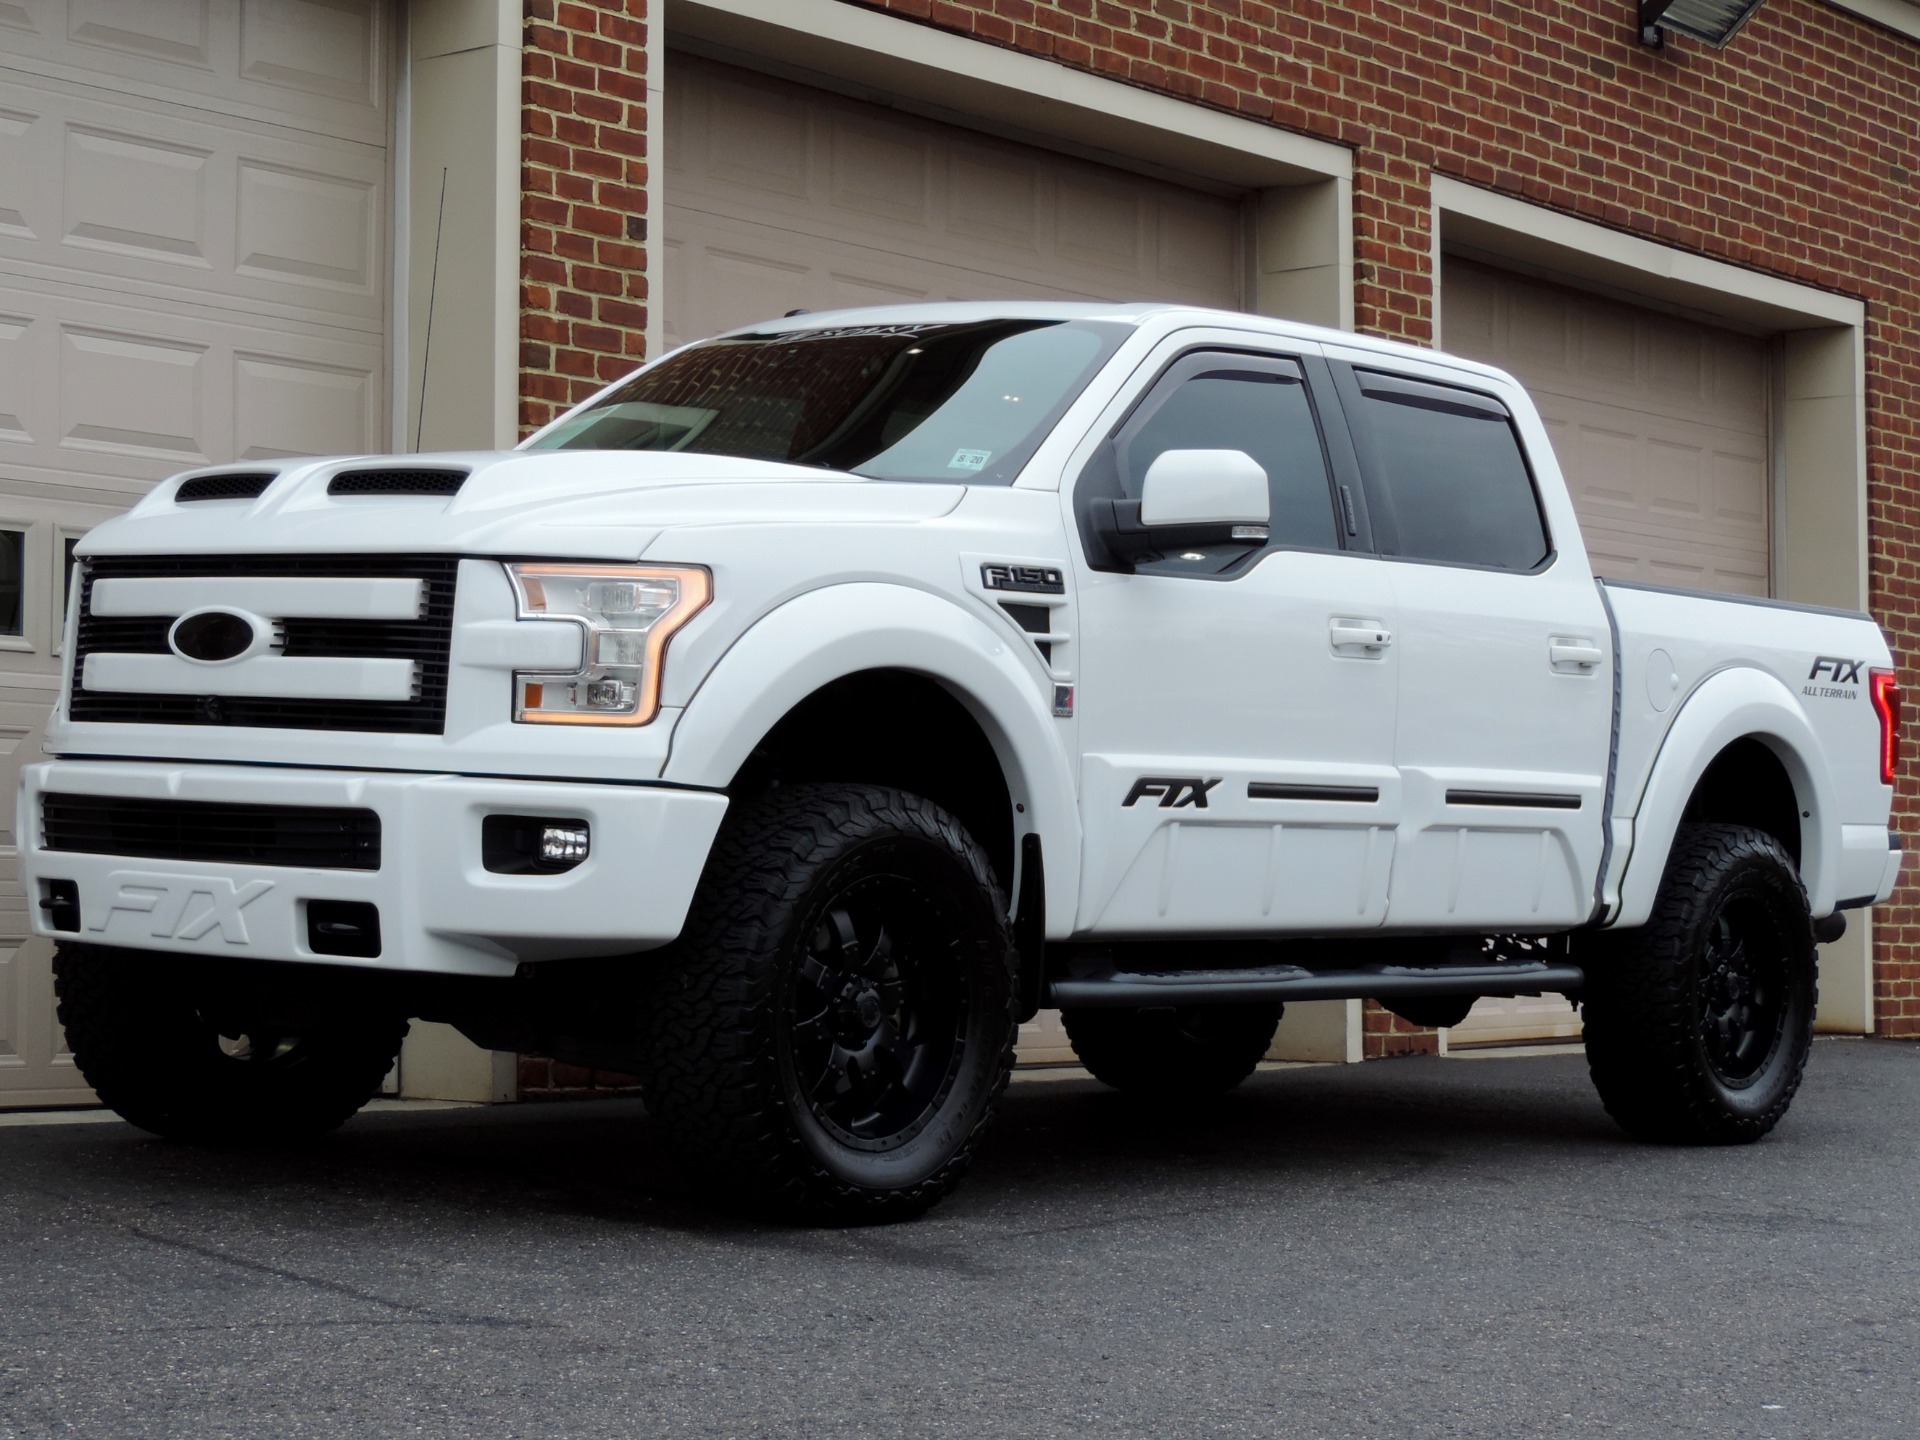 Ftx f150 for sale